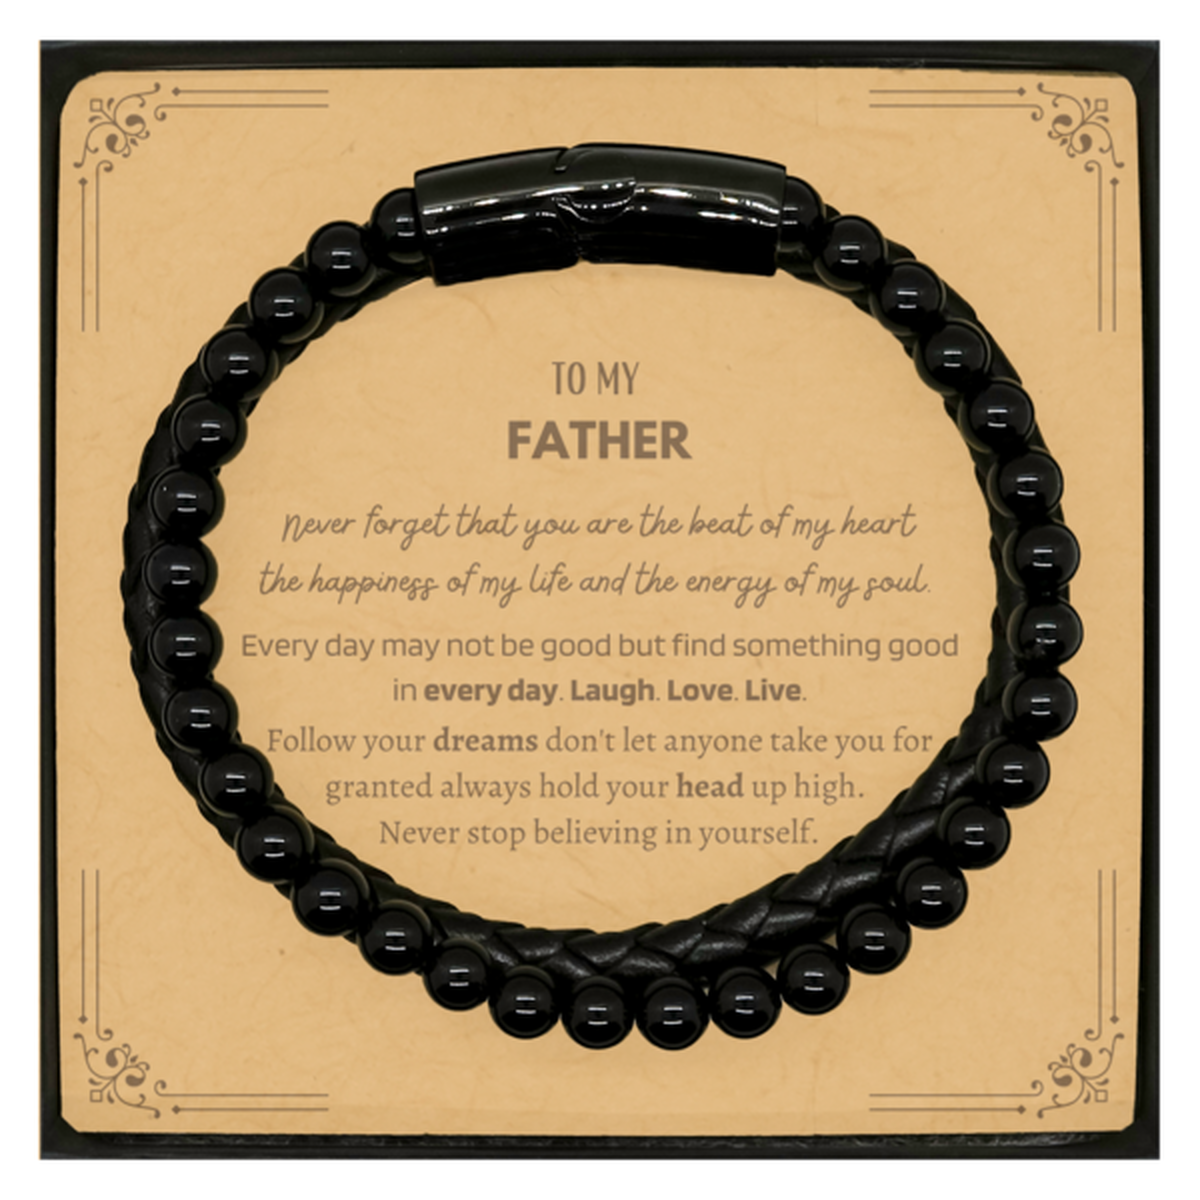 To My Father Message Card Gifts, Christmas Father Stone Leather Bracelets Present, Birthday Unique Motivational For Father, To My Father Never forget that you are the beat of my heart the happiness of my life and the energy of my soul